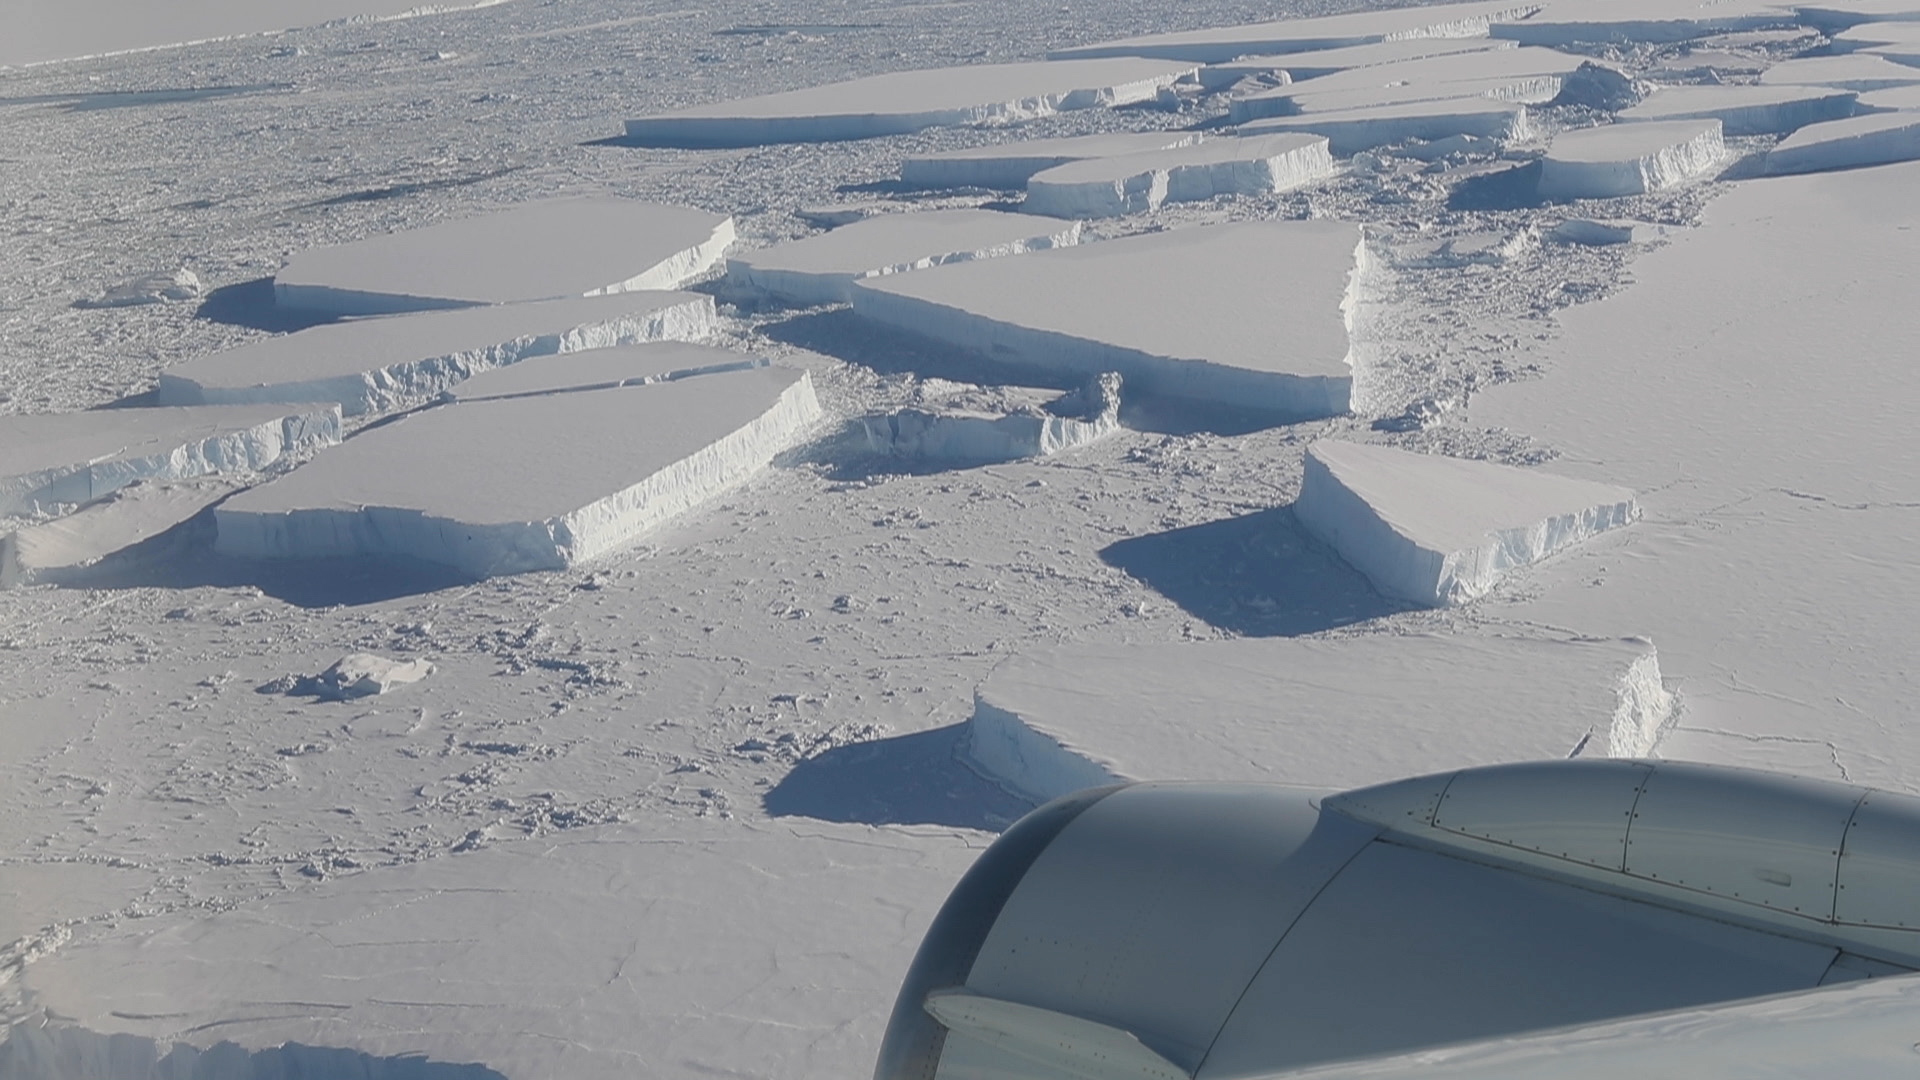 The rectangular iceberg appeared to be freshly calved from Larsen C, which in July 2017 released the massive A68 iceberg, a chunk of ice about the size of the state of Delaware.NOTE: The audio on this clip varies widely and includes loud aircraft noise. We advise turning down/off sound when previewing this item.